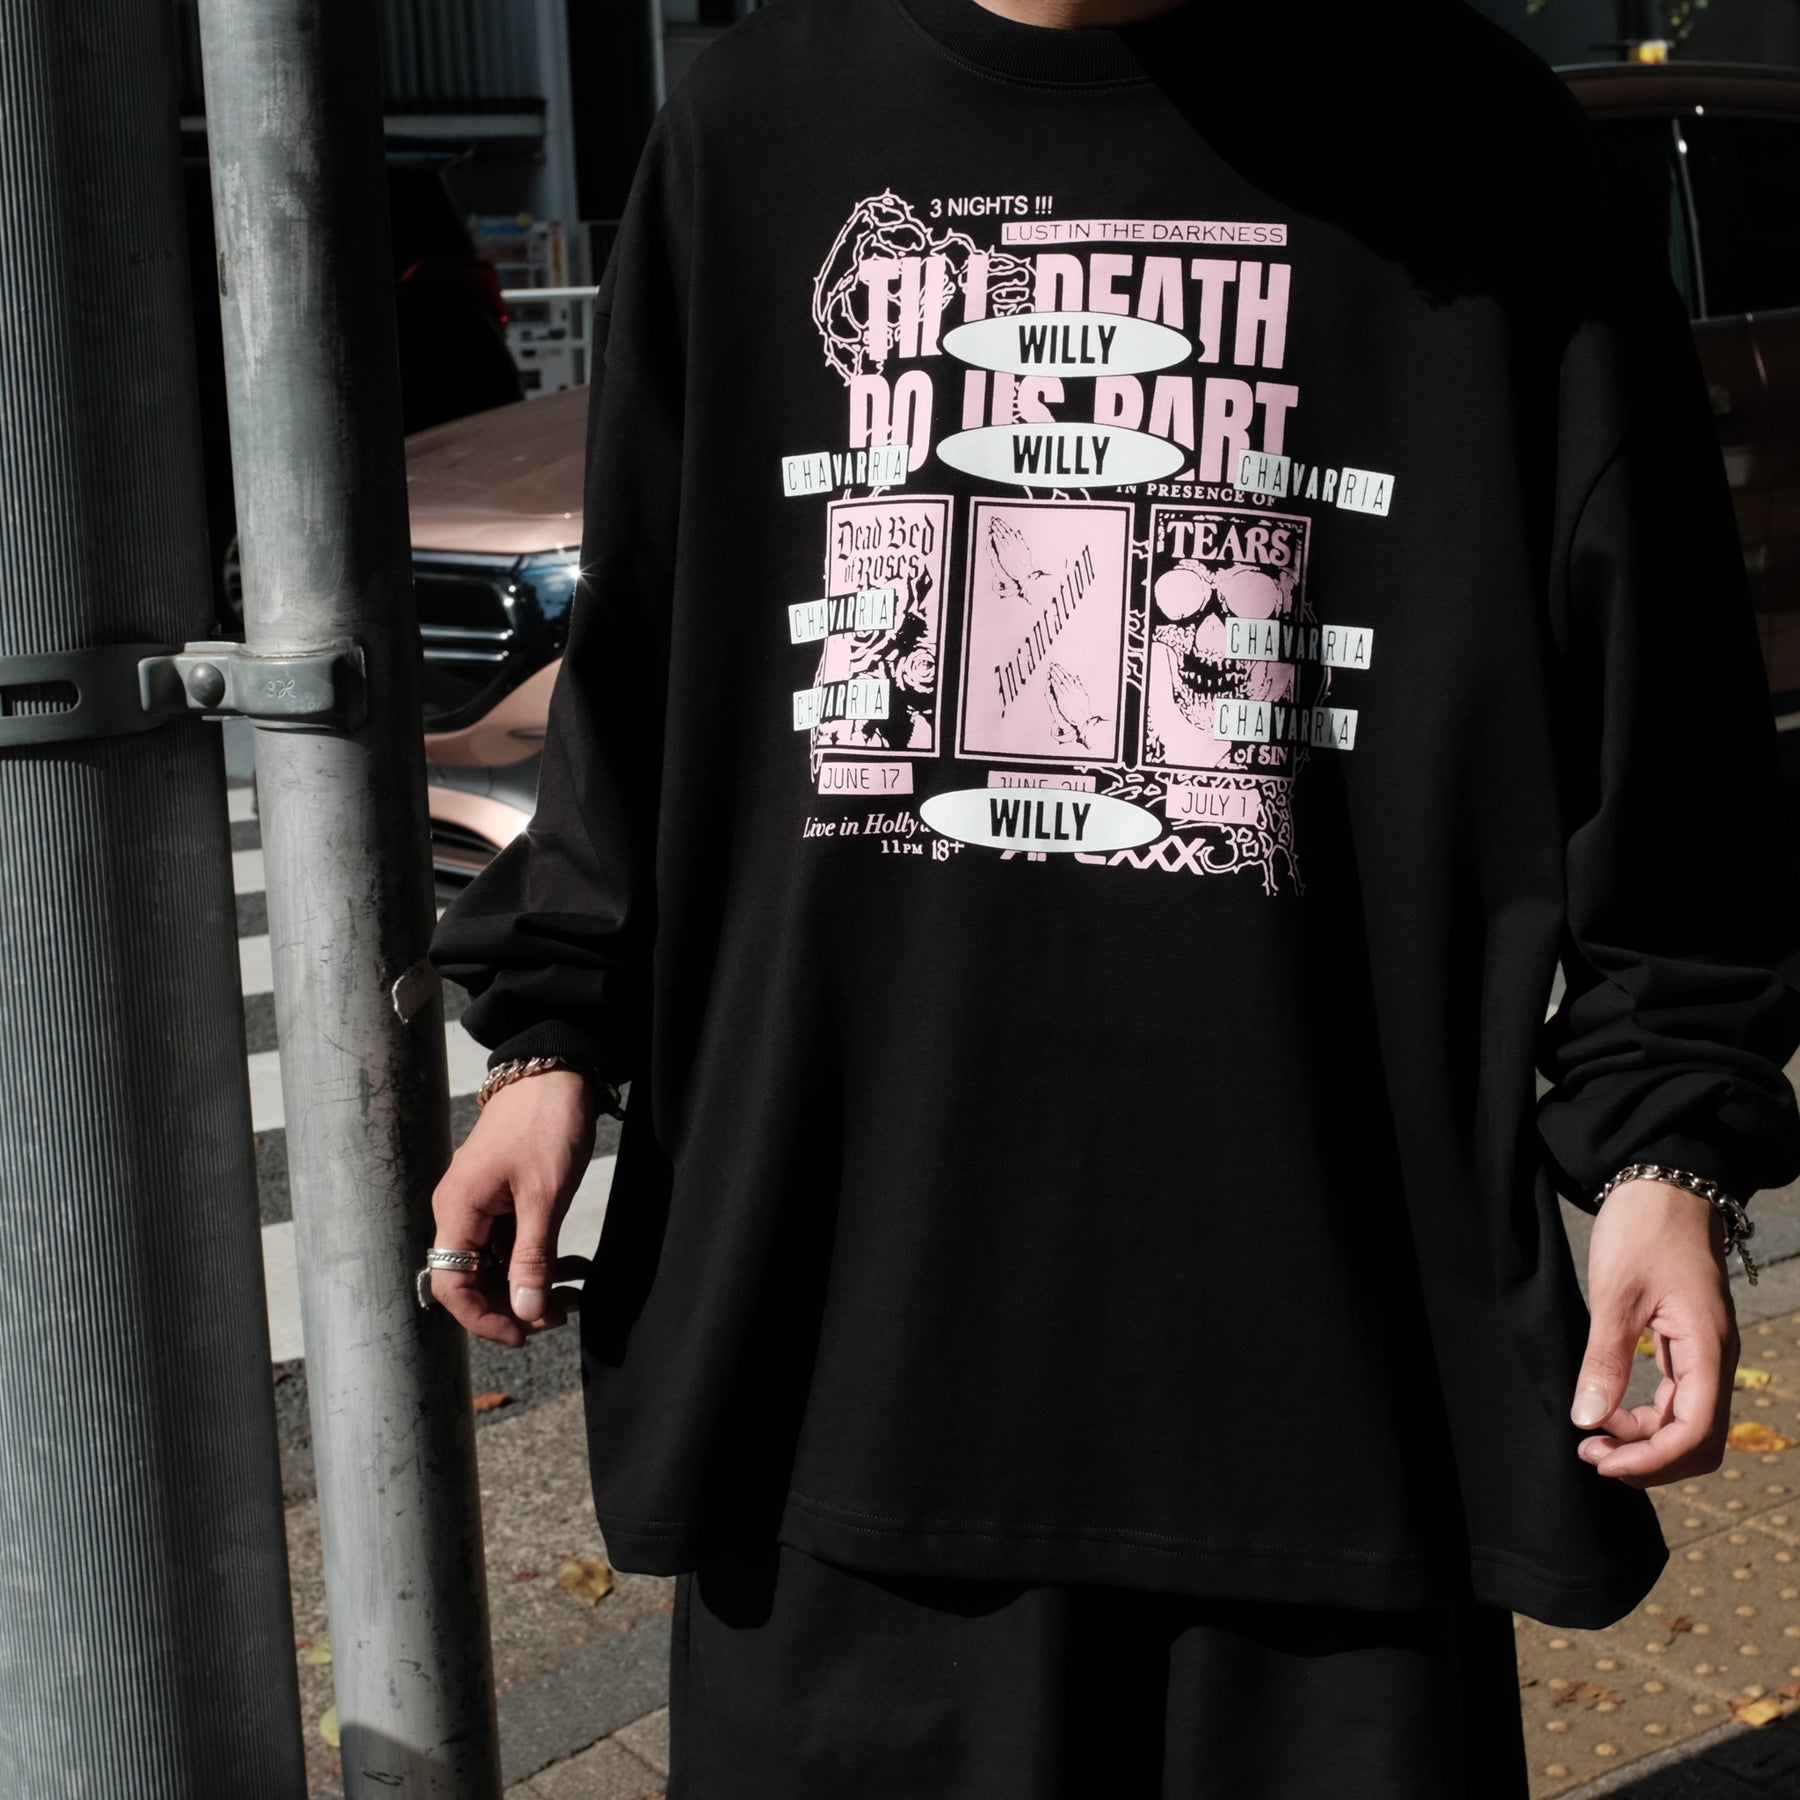 WILLY CHAVARRIA / TILL DEATH + FLYERS LS BUFFALO T SOLID BLACK